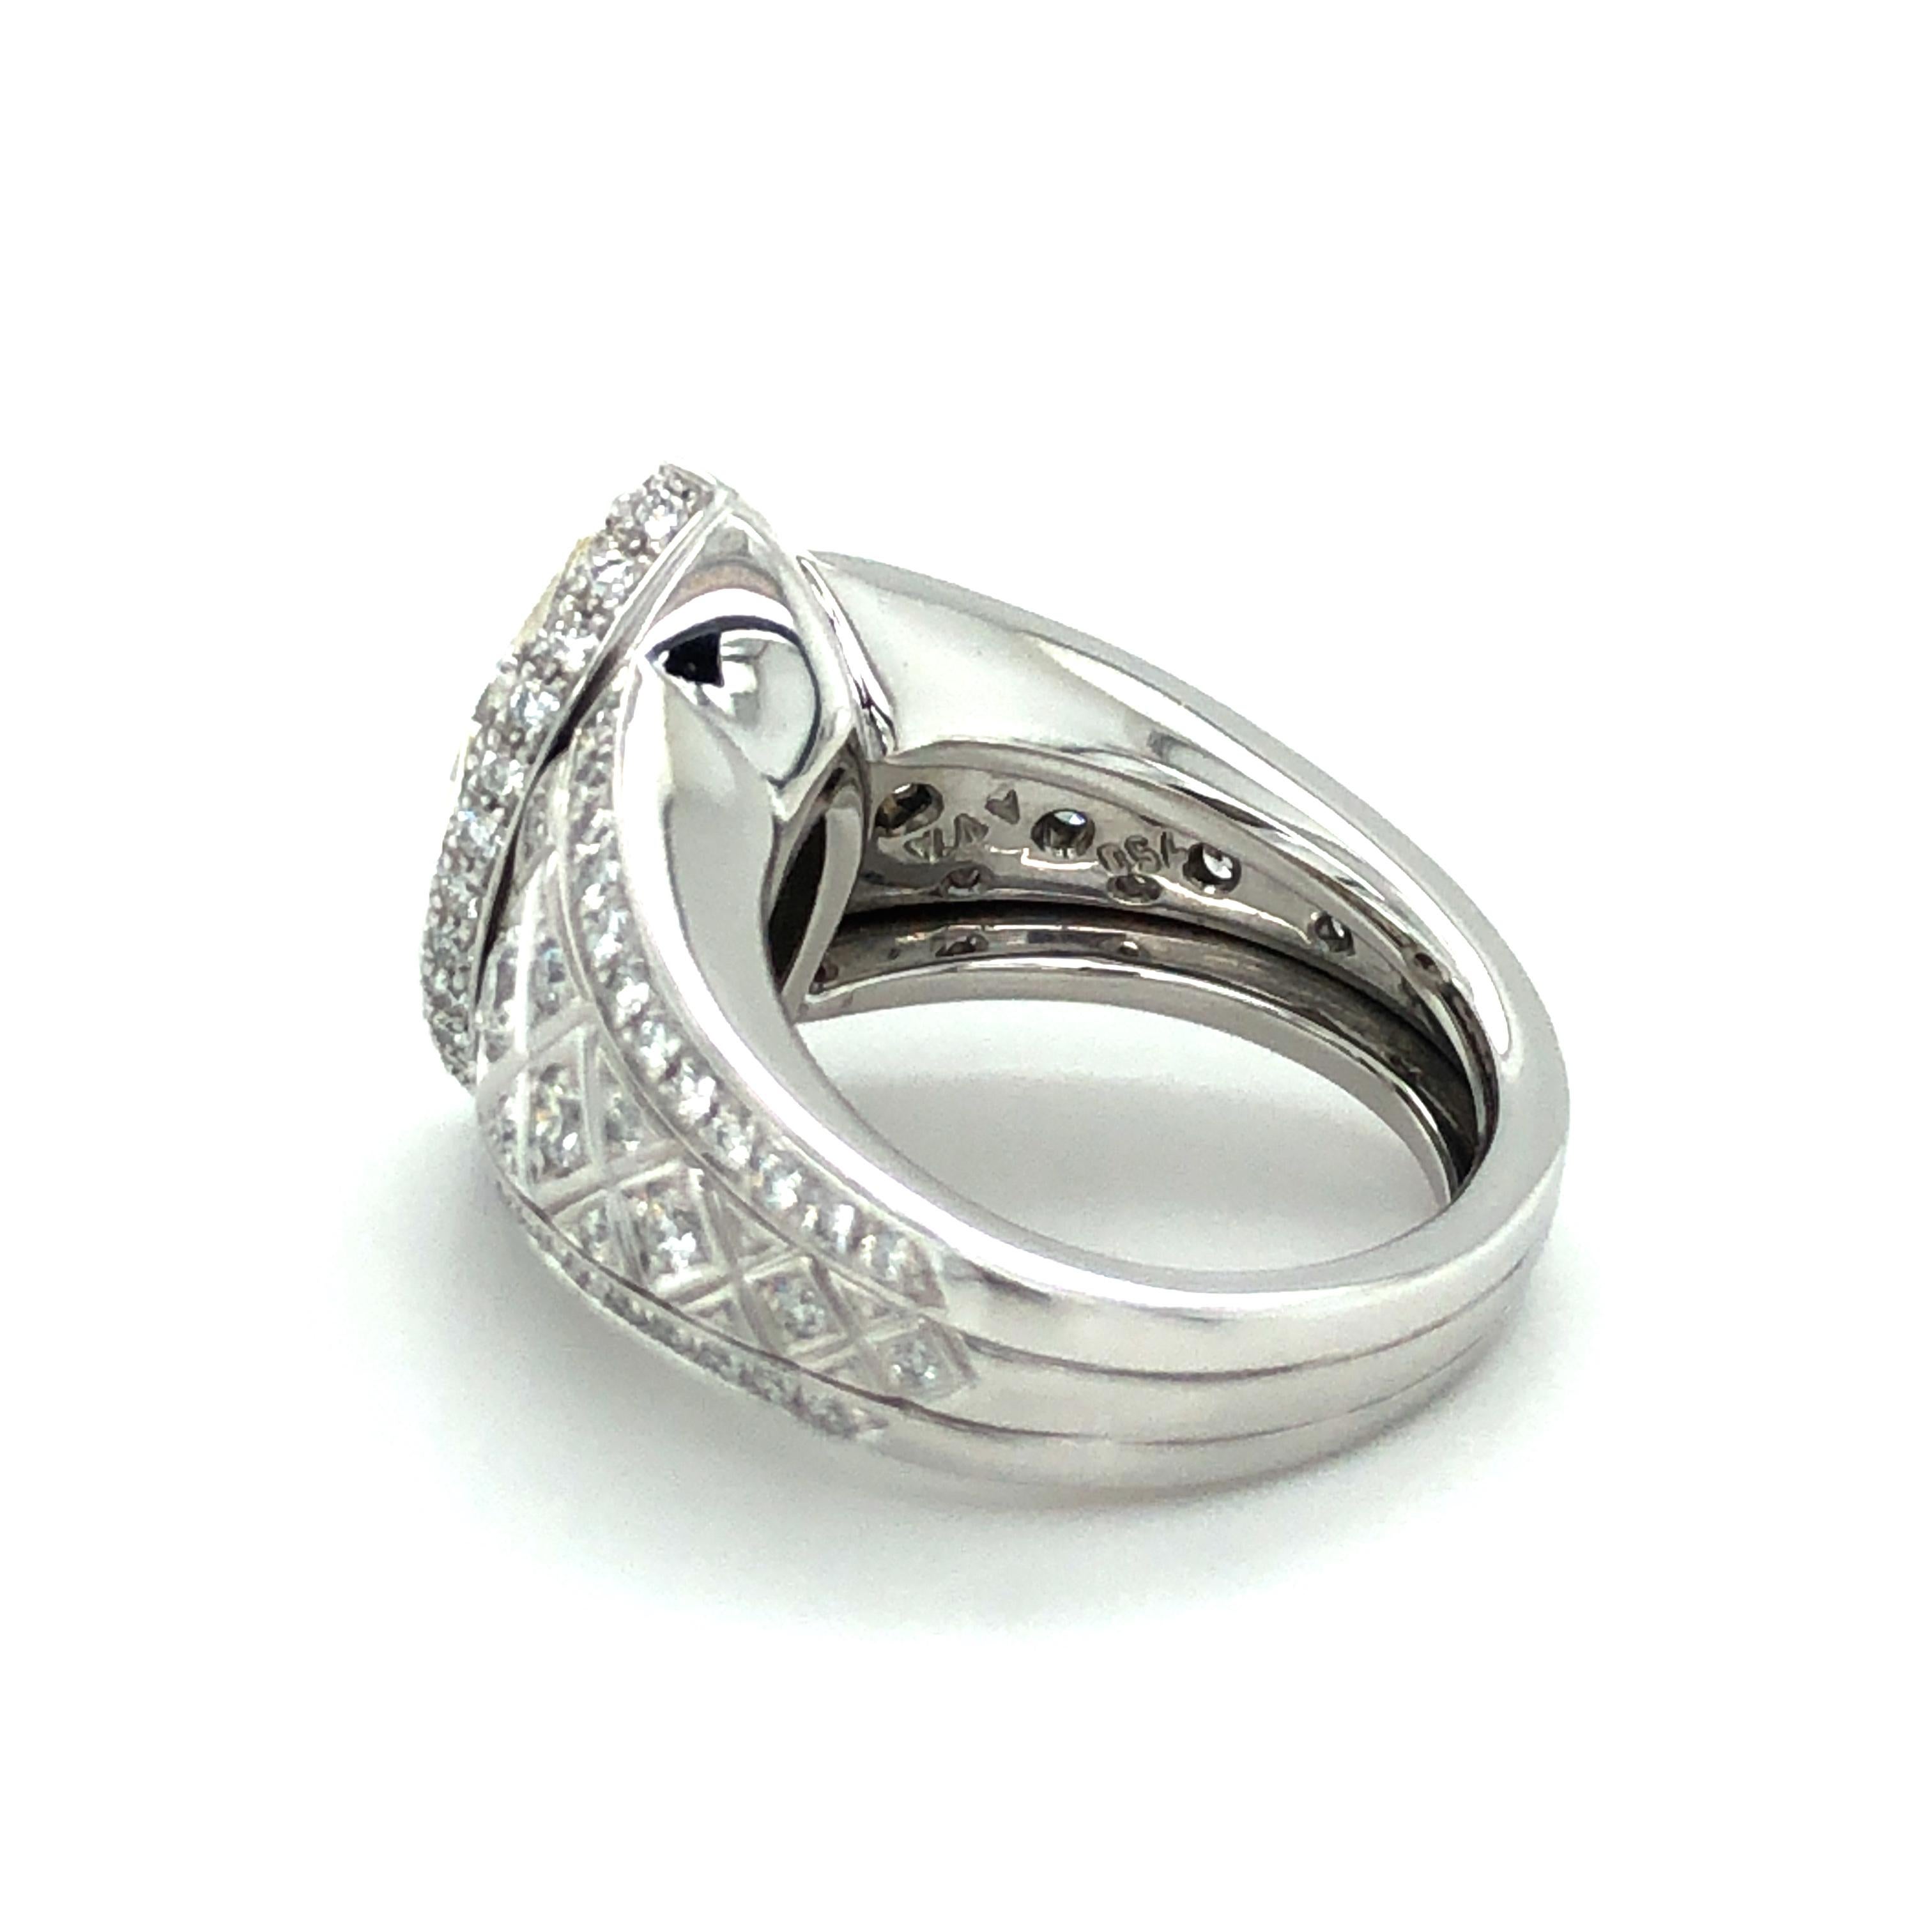 Marquise Cut 2.77 Carat Marquise-Cut Diamond Ring by Avalon Swiss in 18 Karat White Gold For Sale